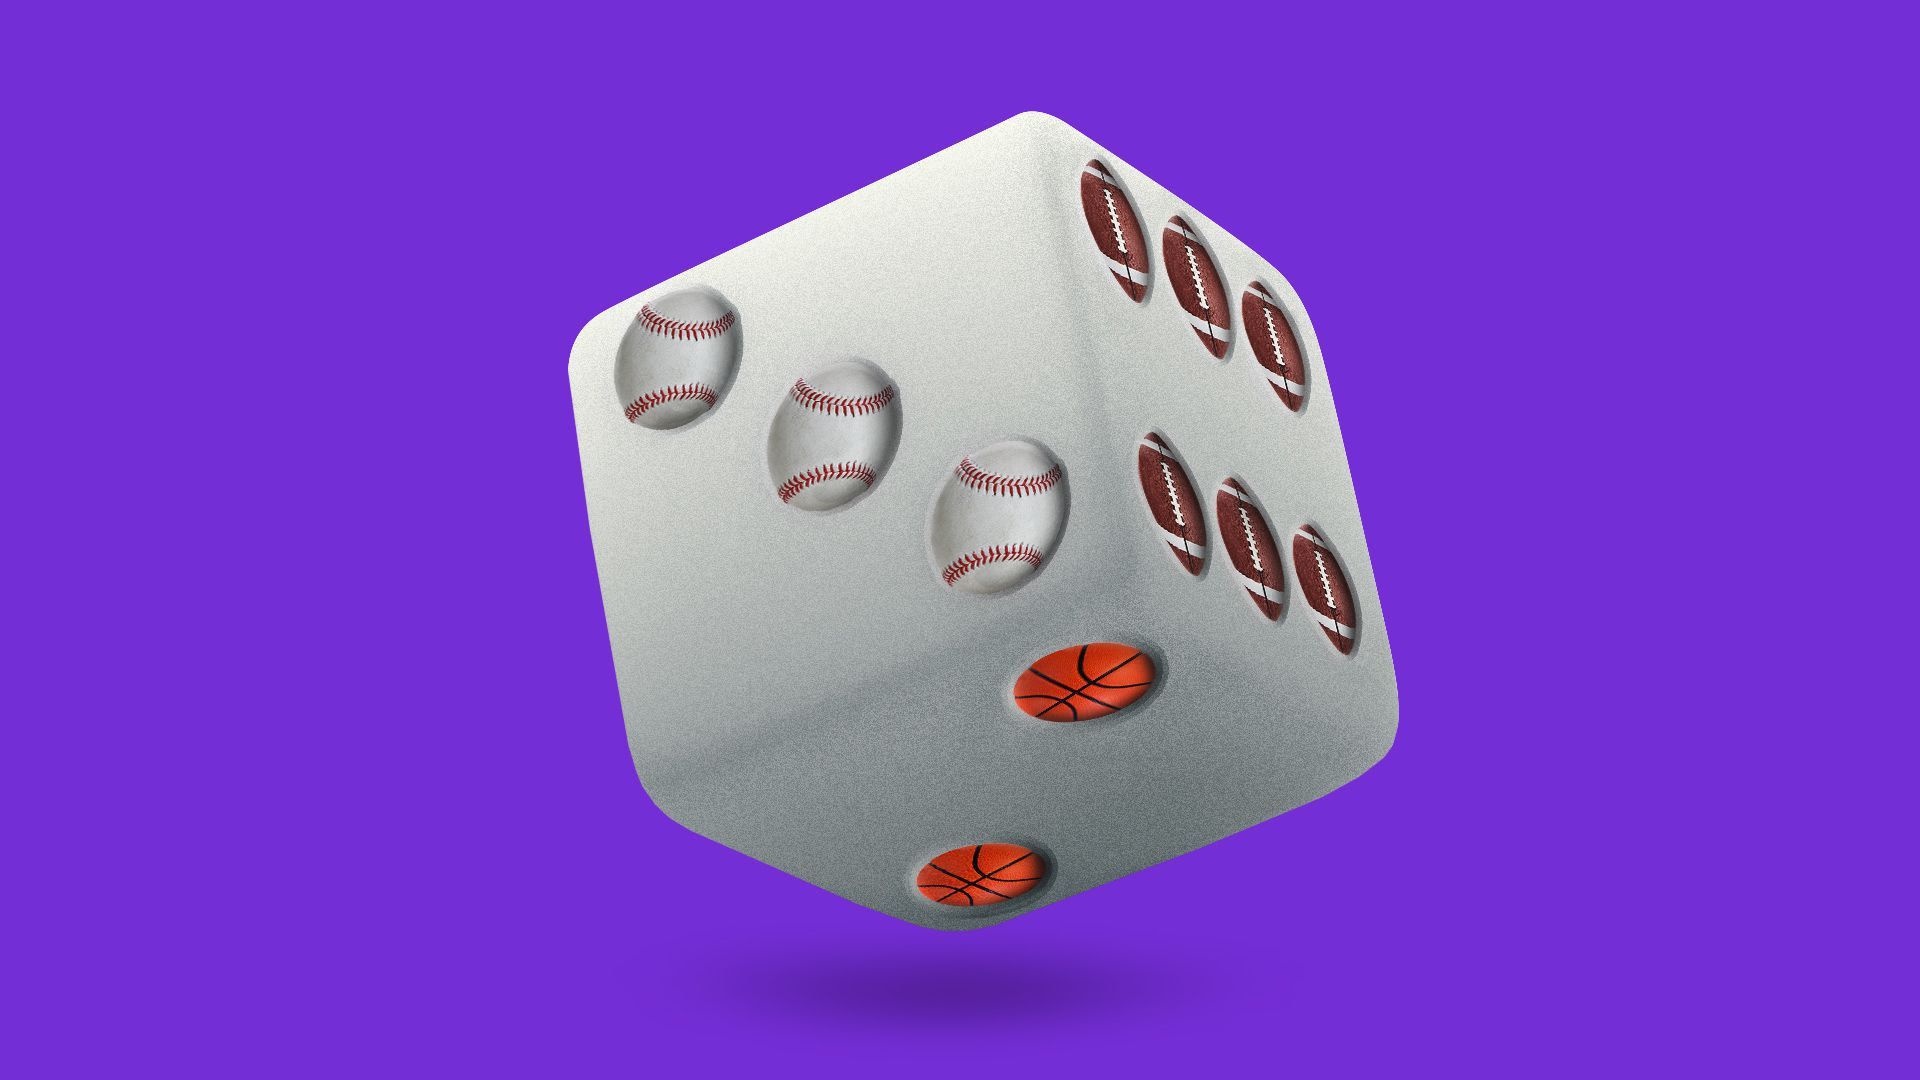 Illustration of a die with sport balls on it.